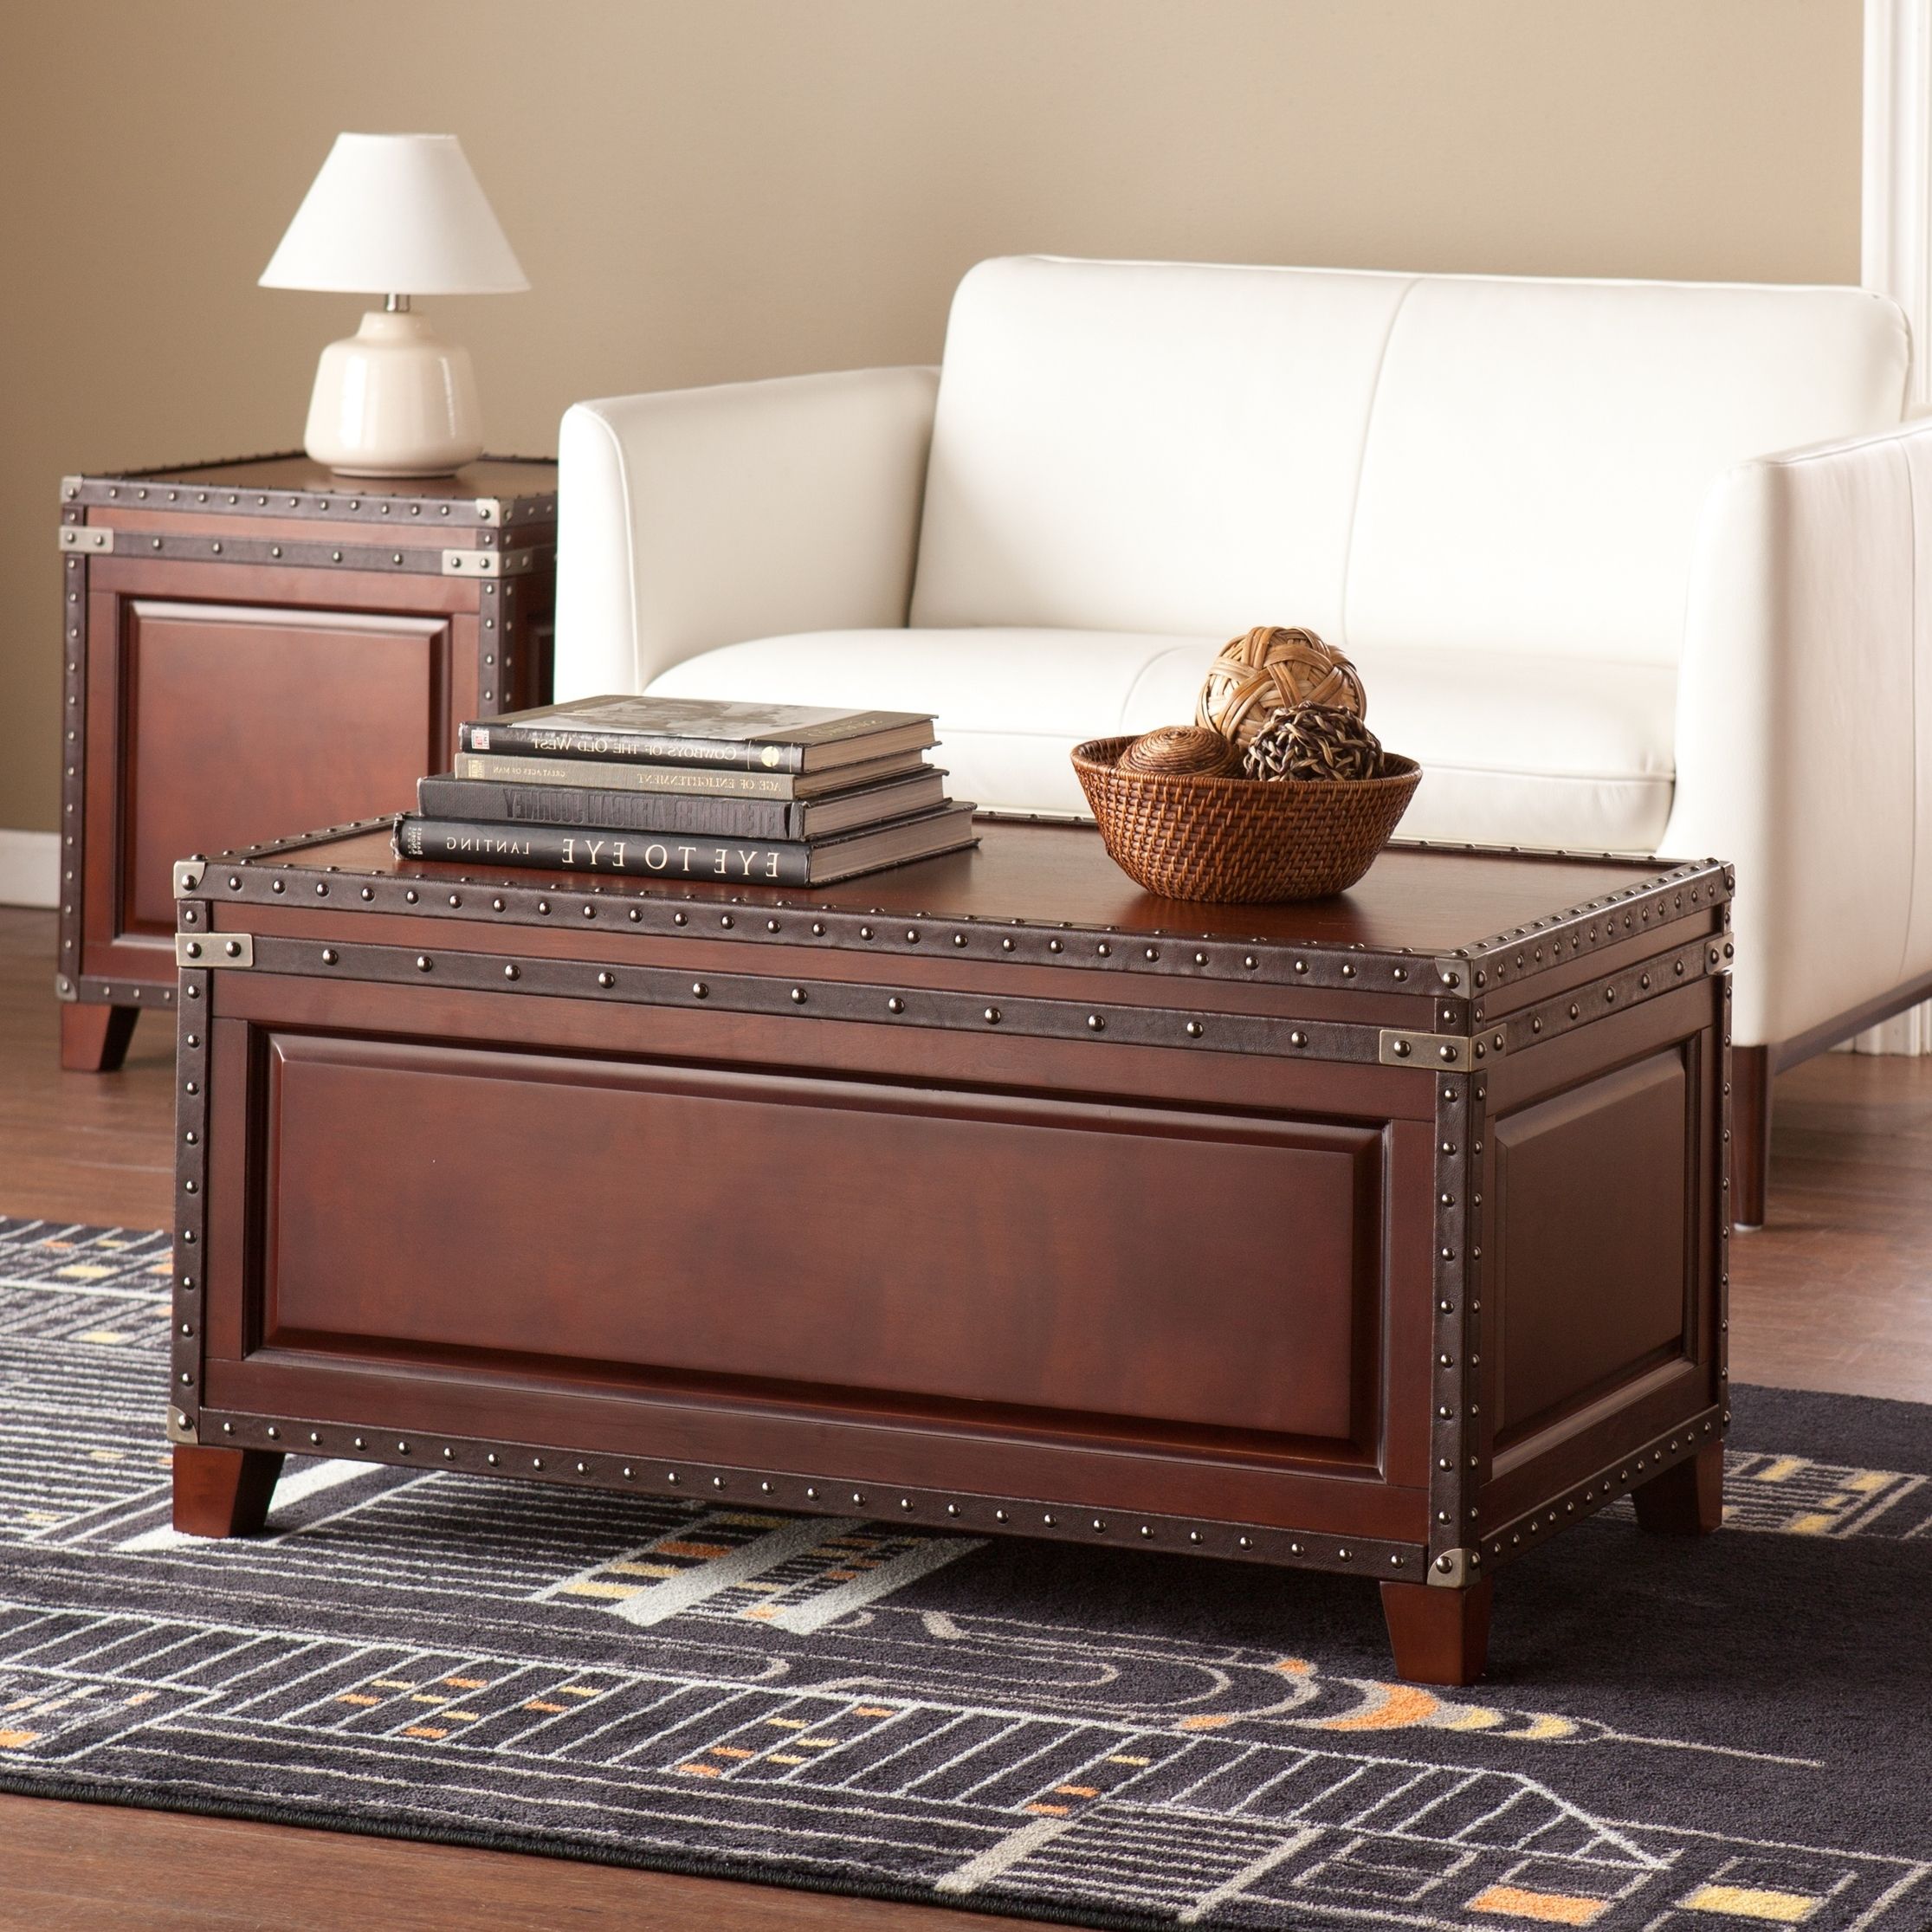 Well Liked Walnut Wood Storage Trunk Cocktail Tables Within Coffee Table With Storage Trunk Chest Hidden Bin Leather (Gallery 6 of 20)